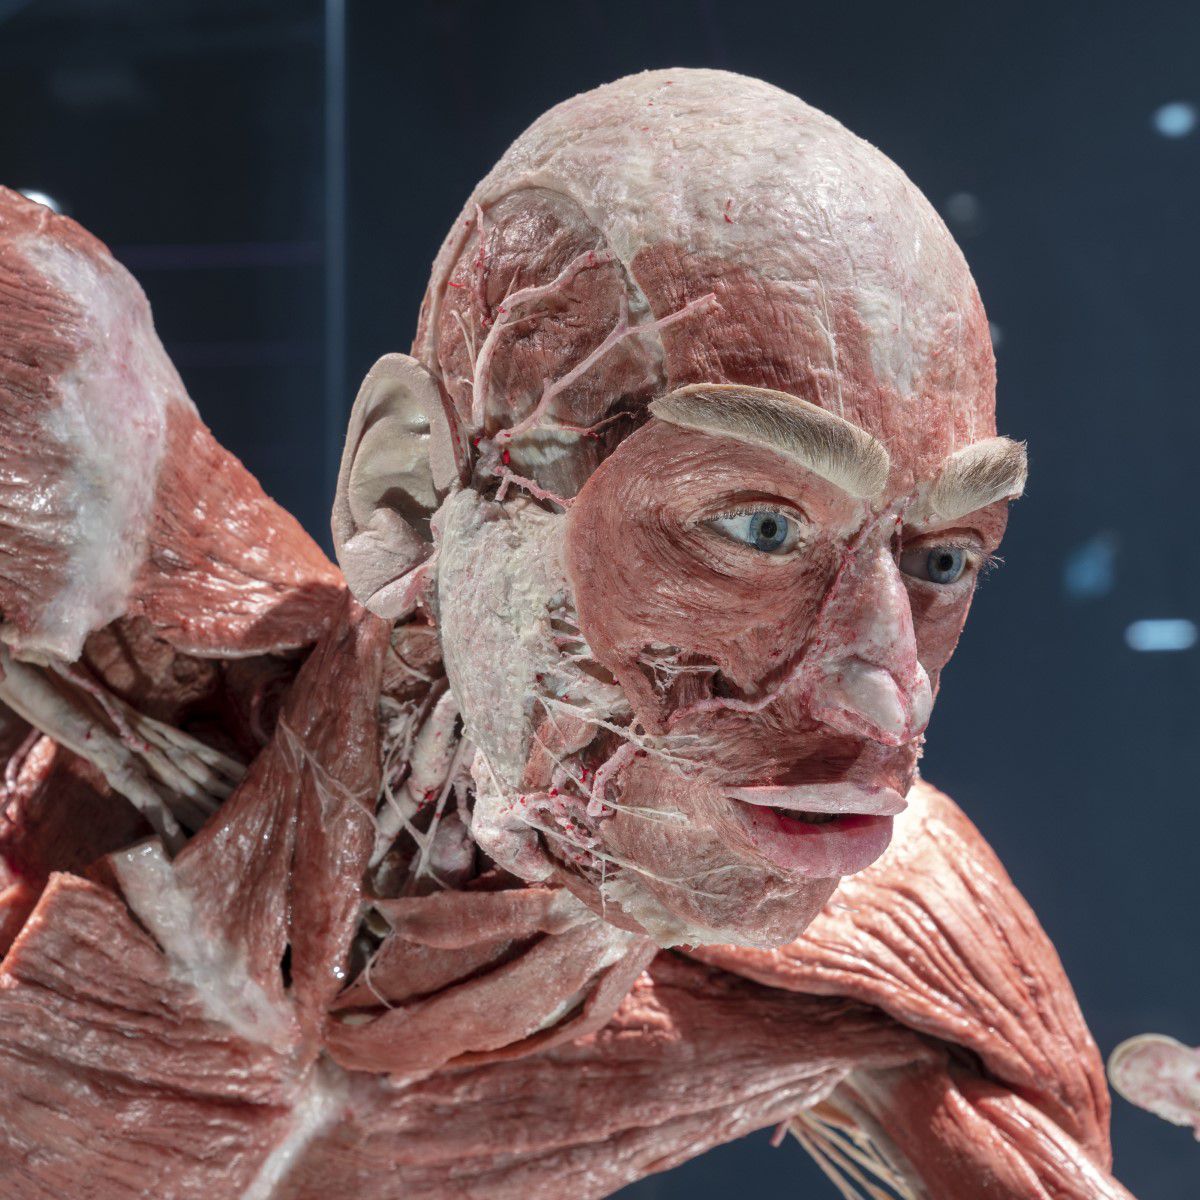 BODY WORLDS Berlin, plastinate of a human body, face and torso